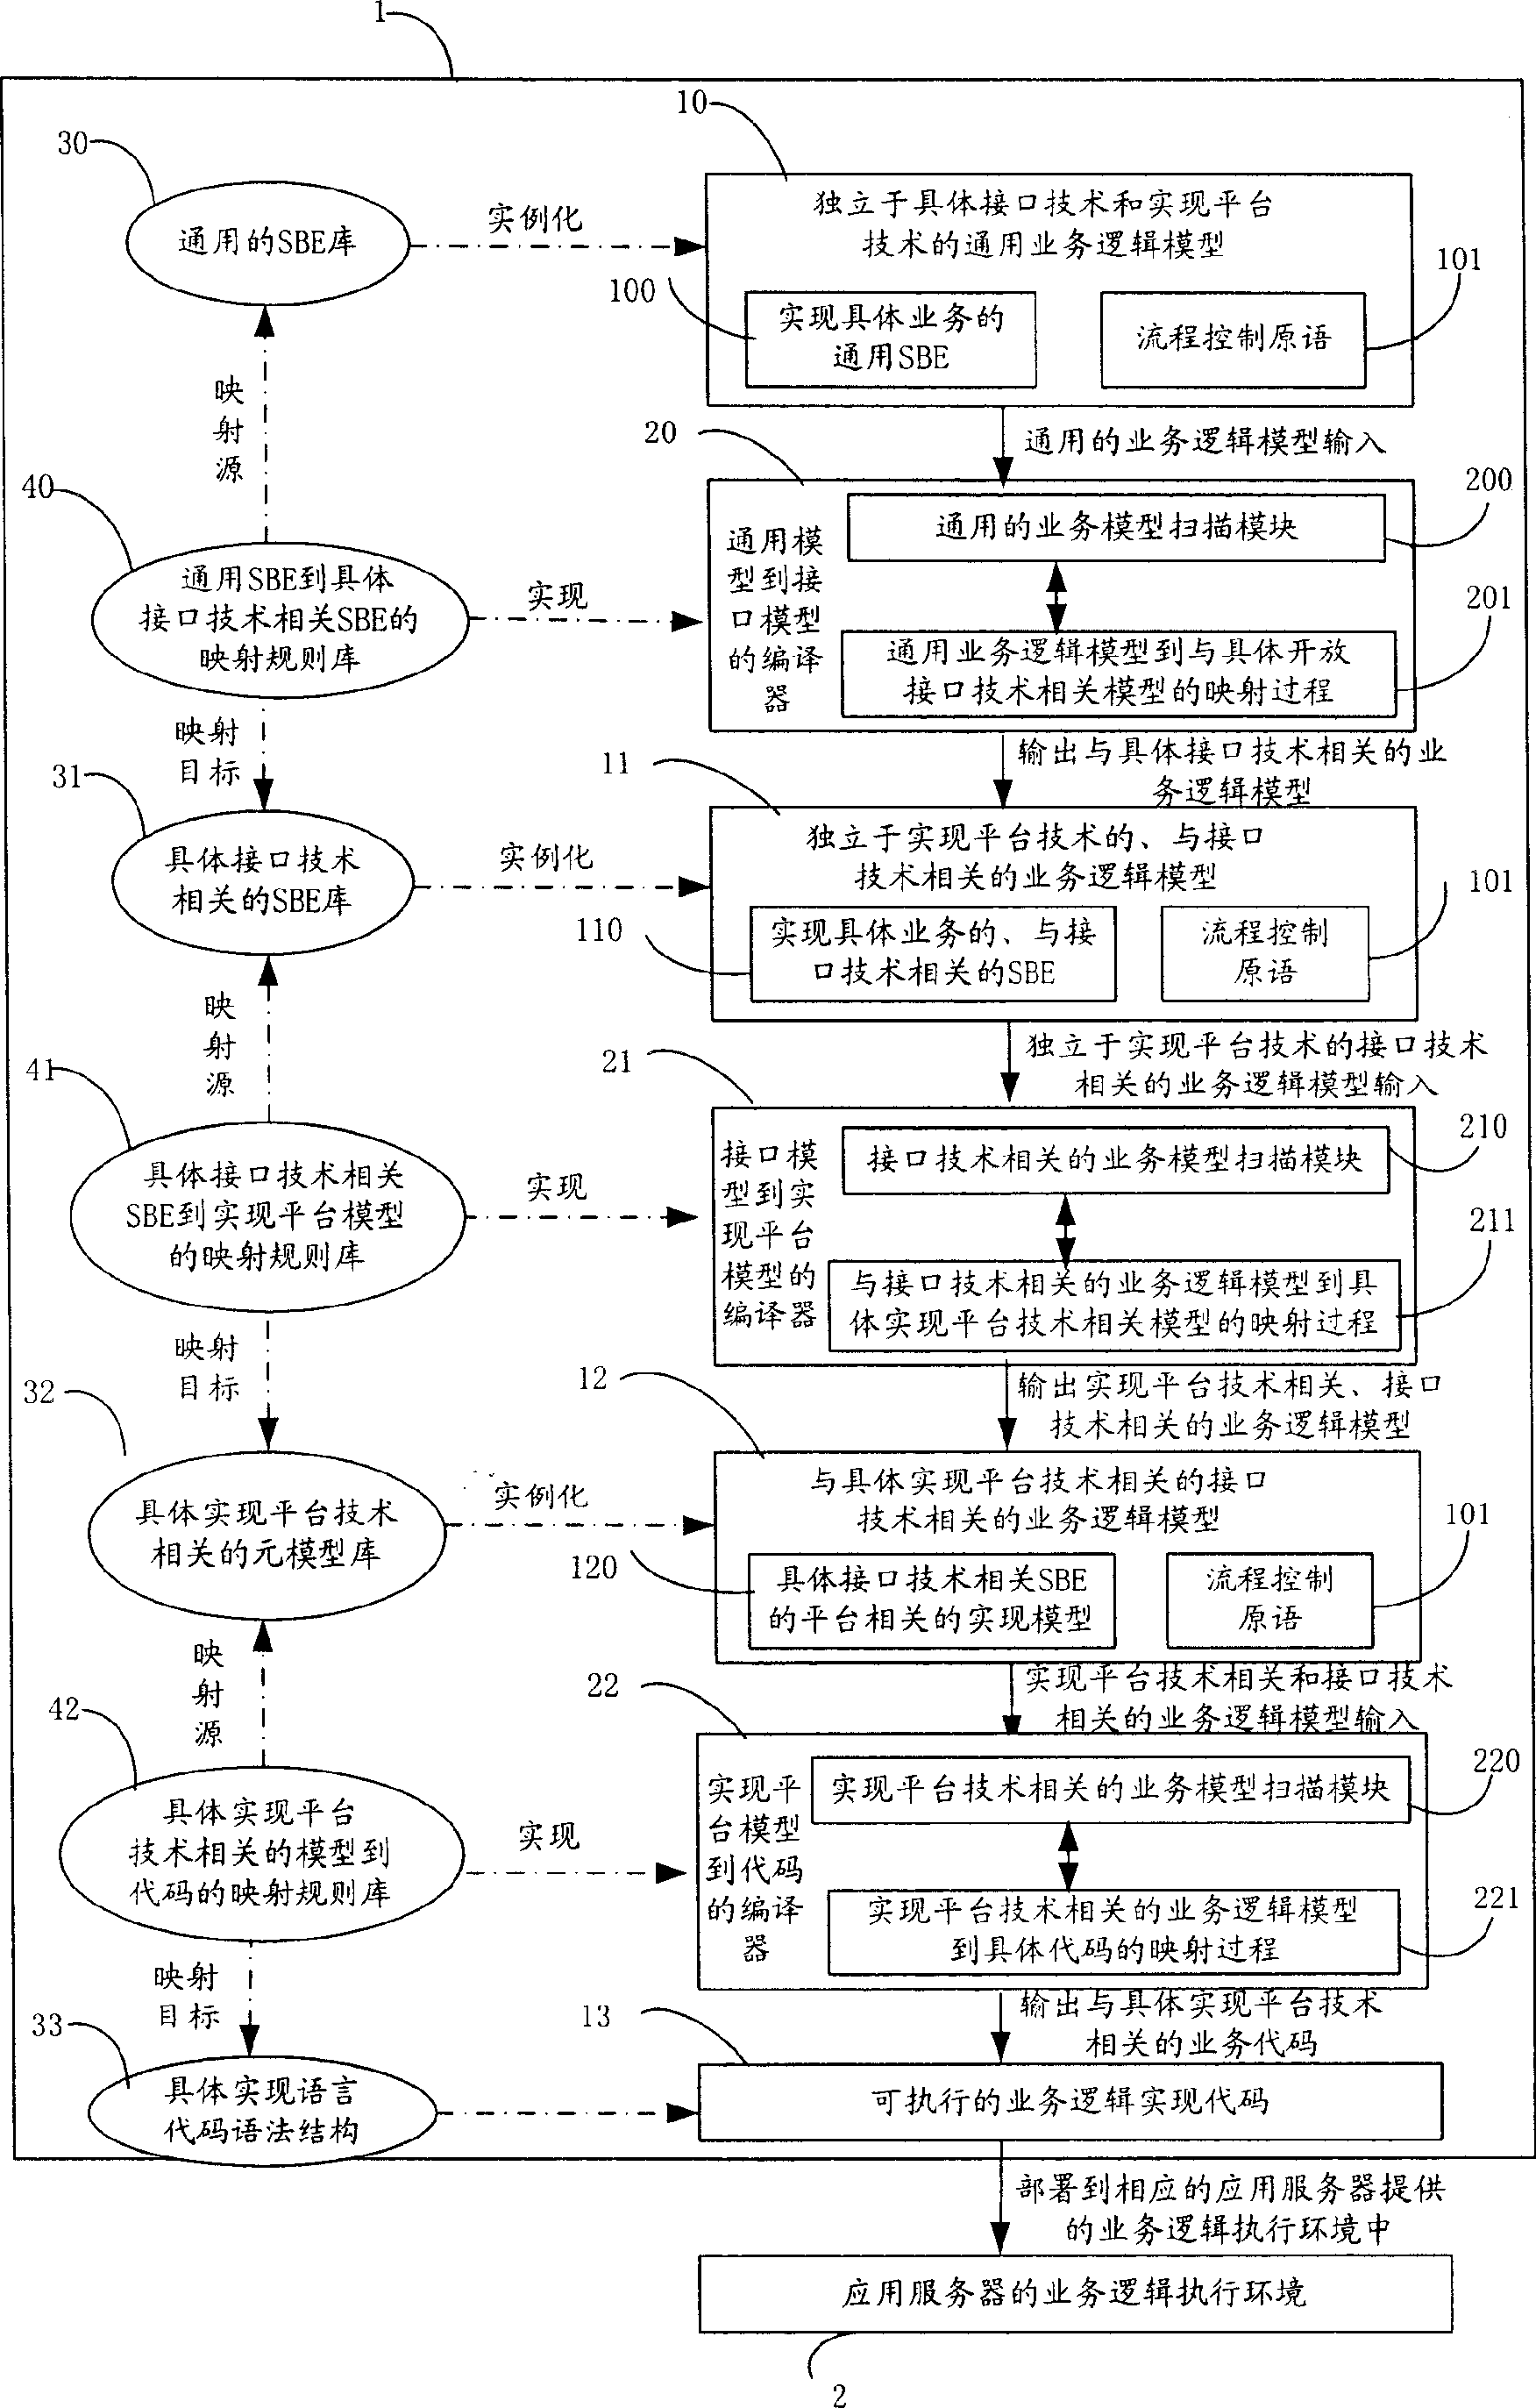 Model driven fused business generating method adapt to different interfaces and platform technique